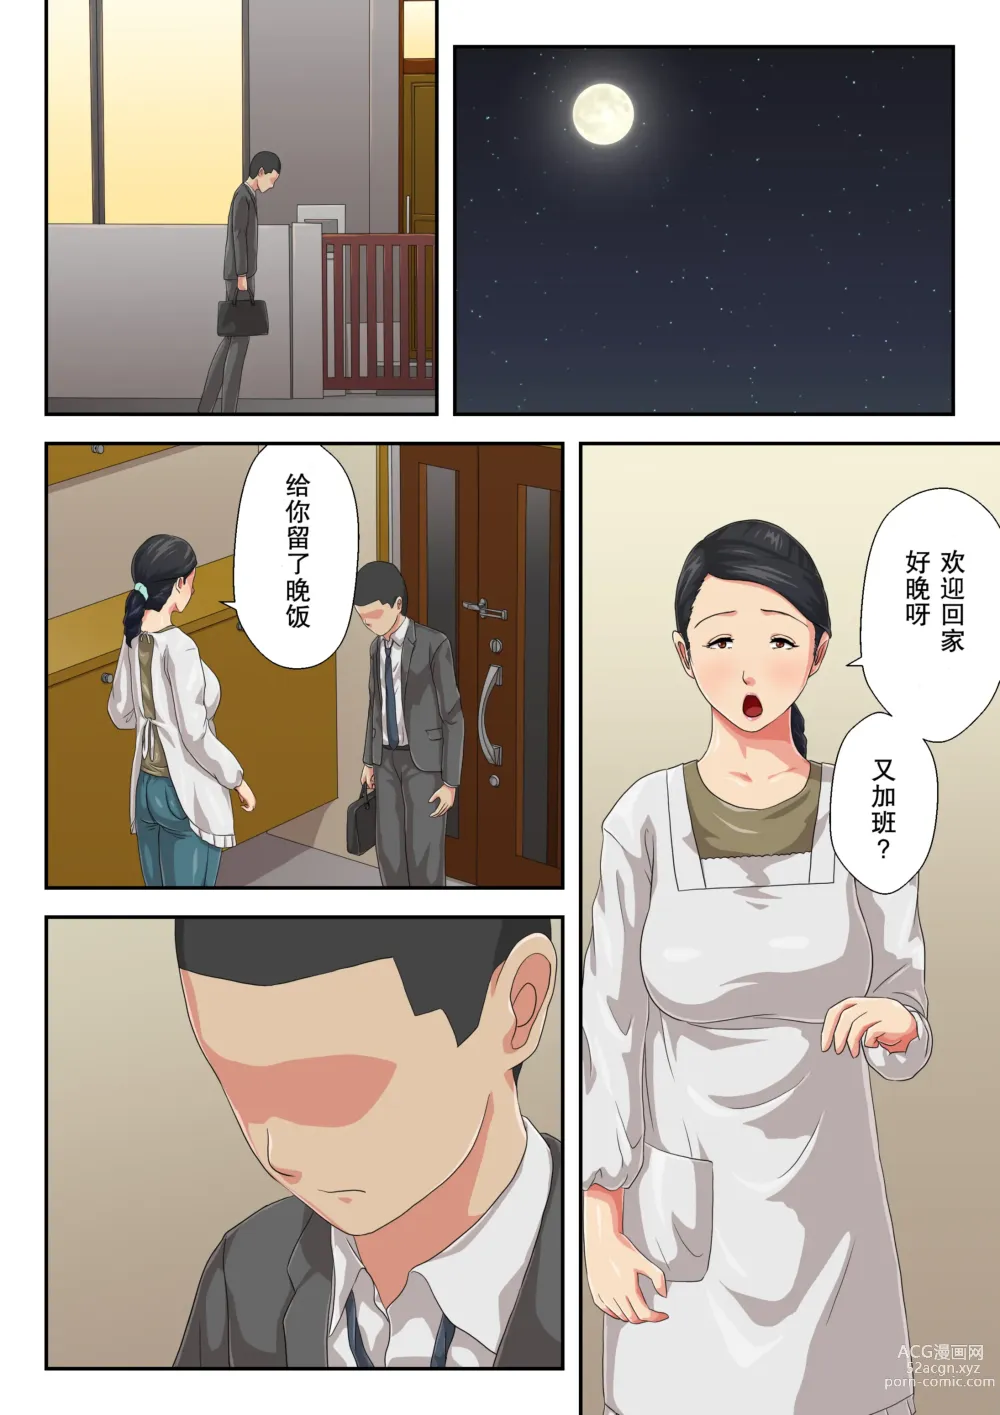 Page 19 of doujinshi 用妈妈发泄吧